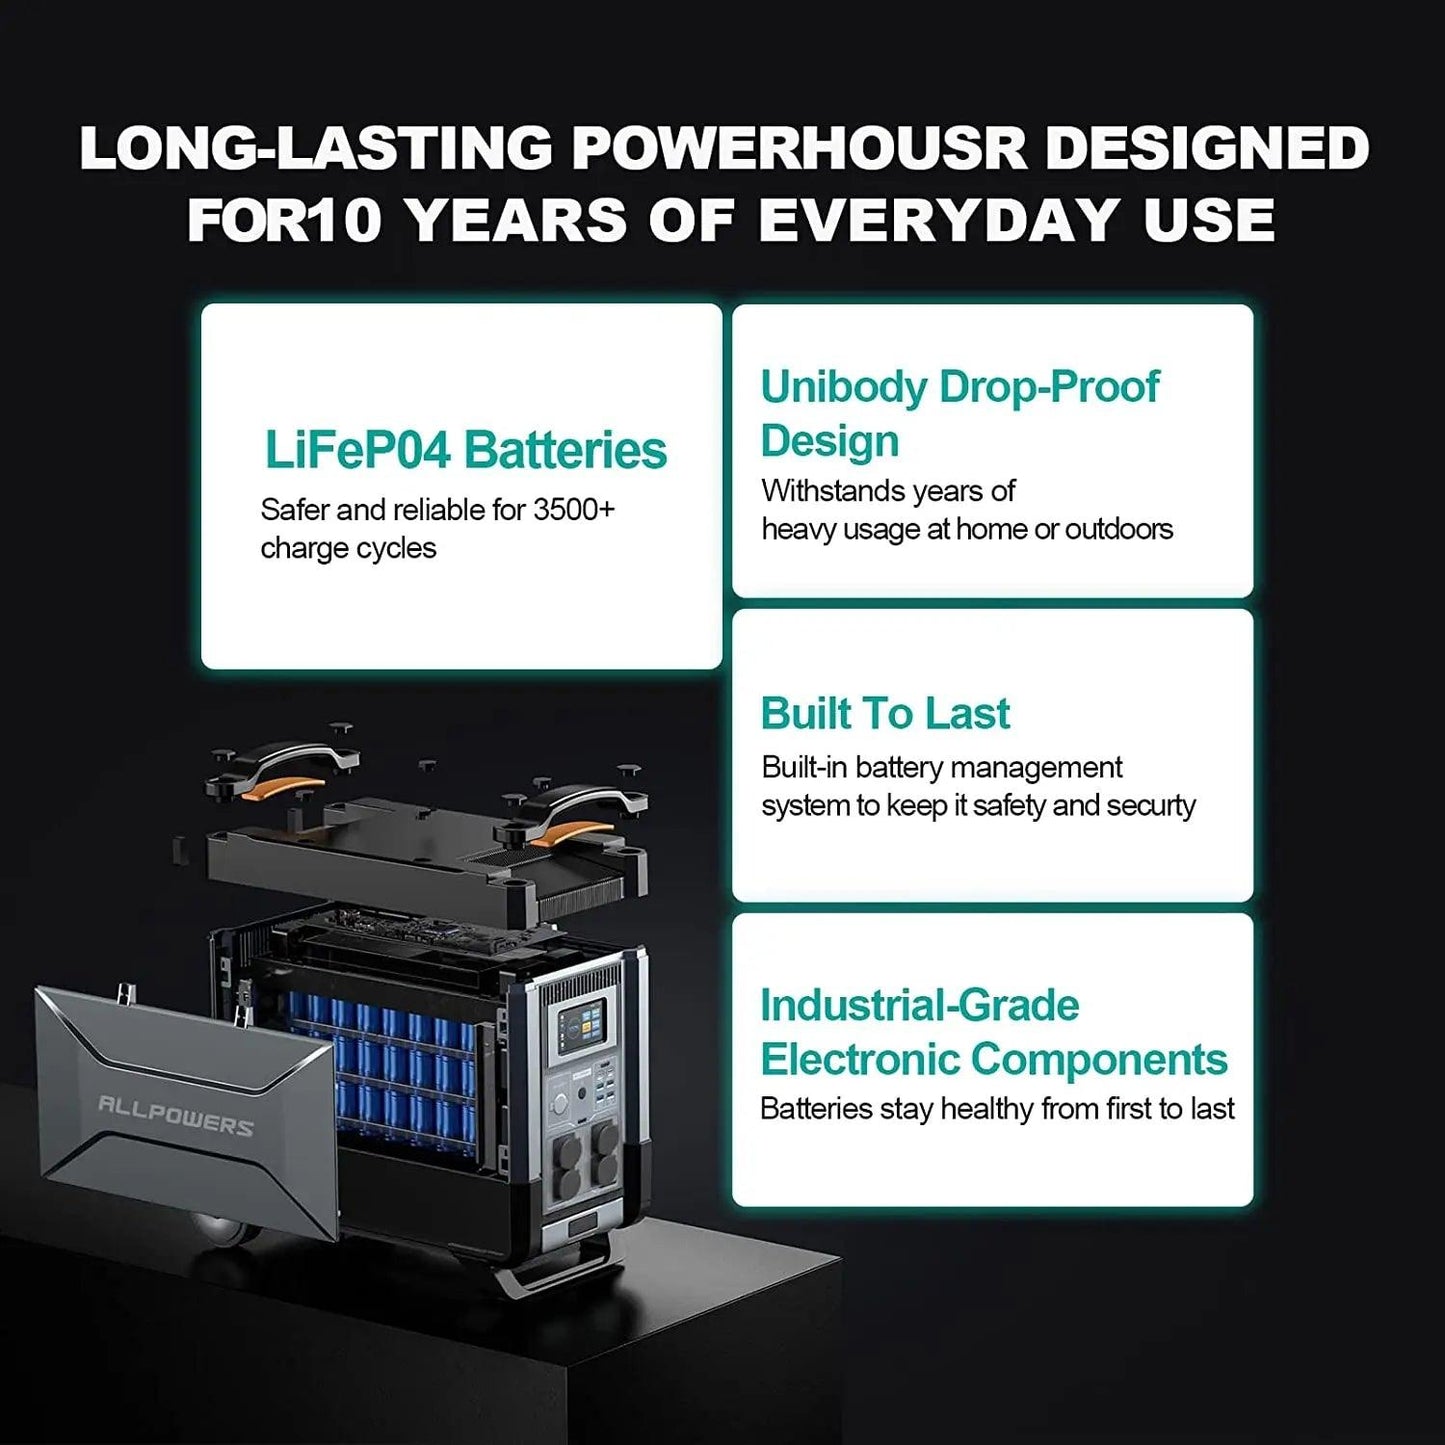 ALLPOWERS R4000 LiFePO4 Battery, 3600Wh Power Station 4000W - Inverted Powers